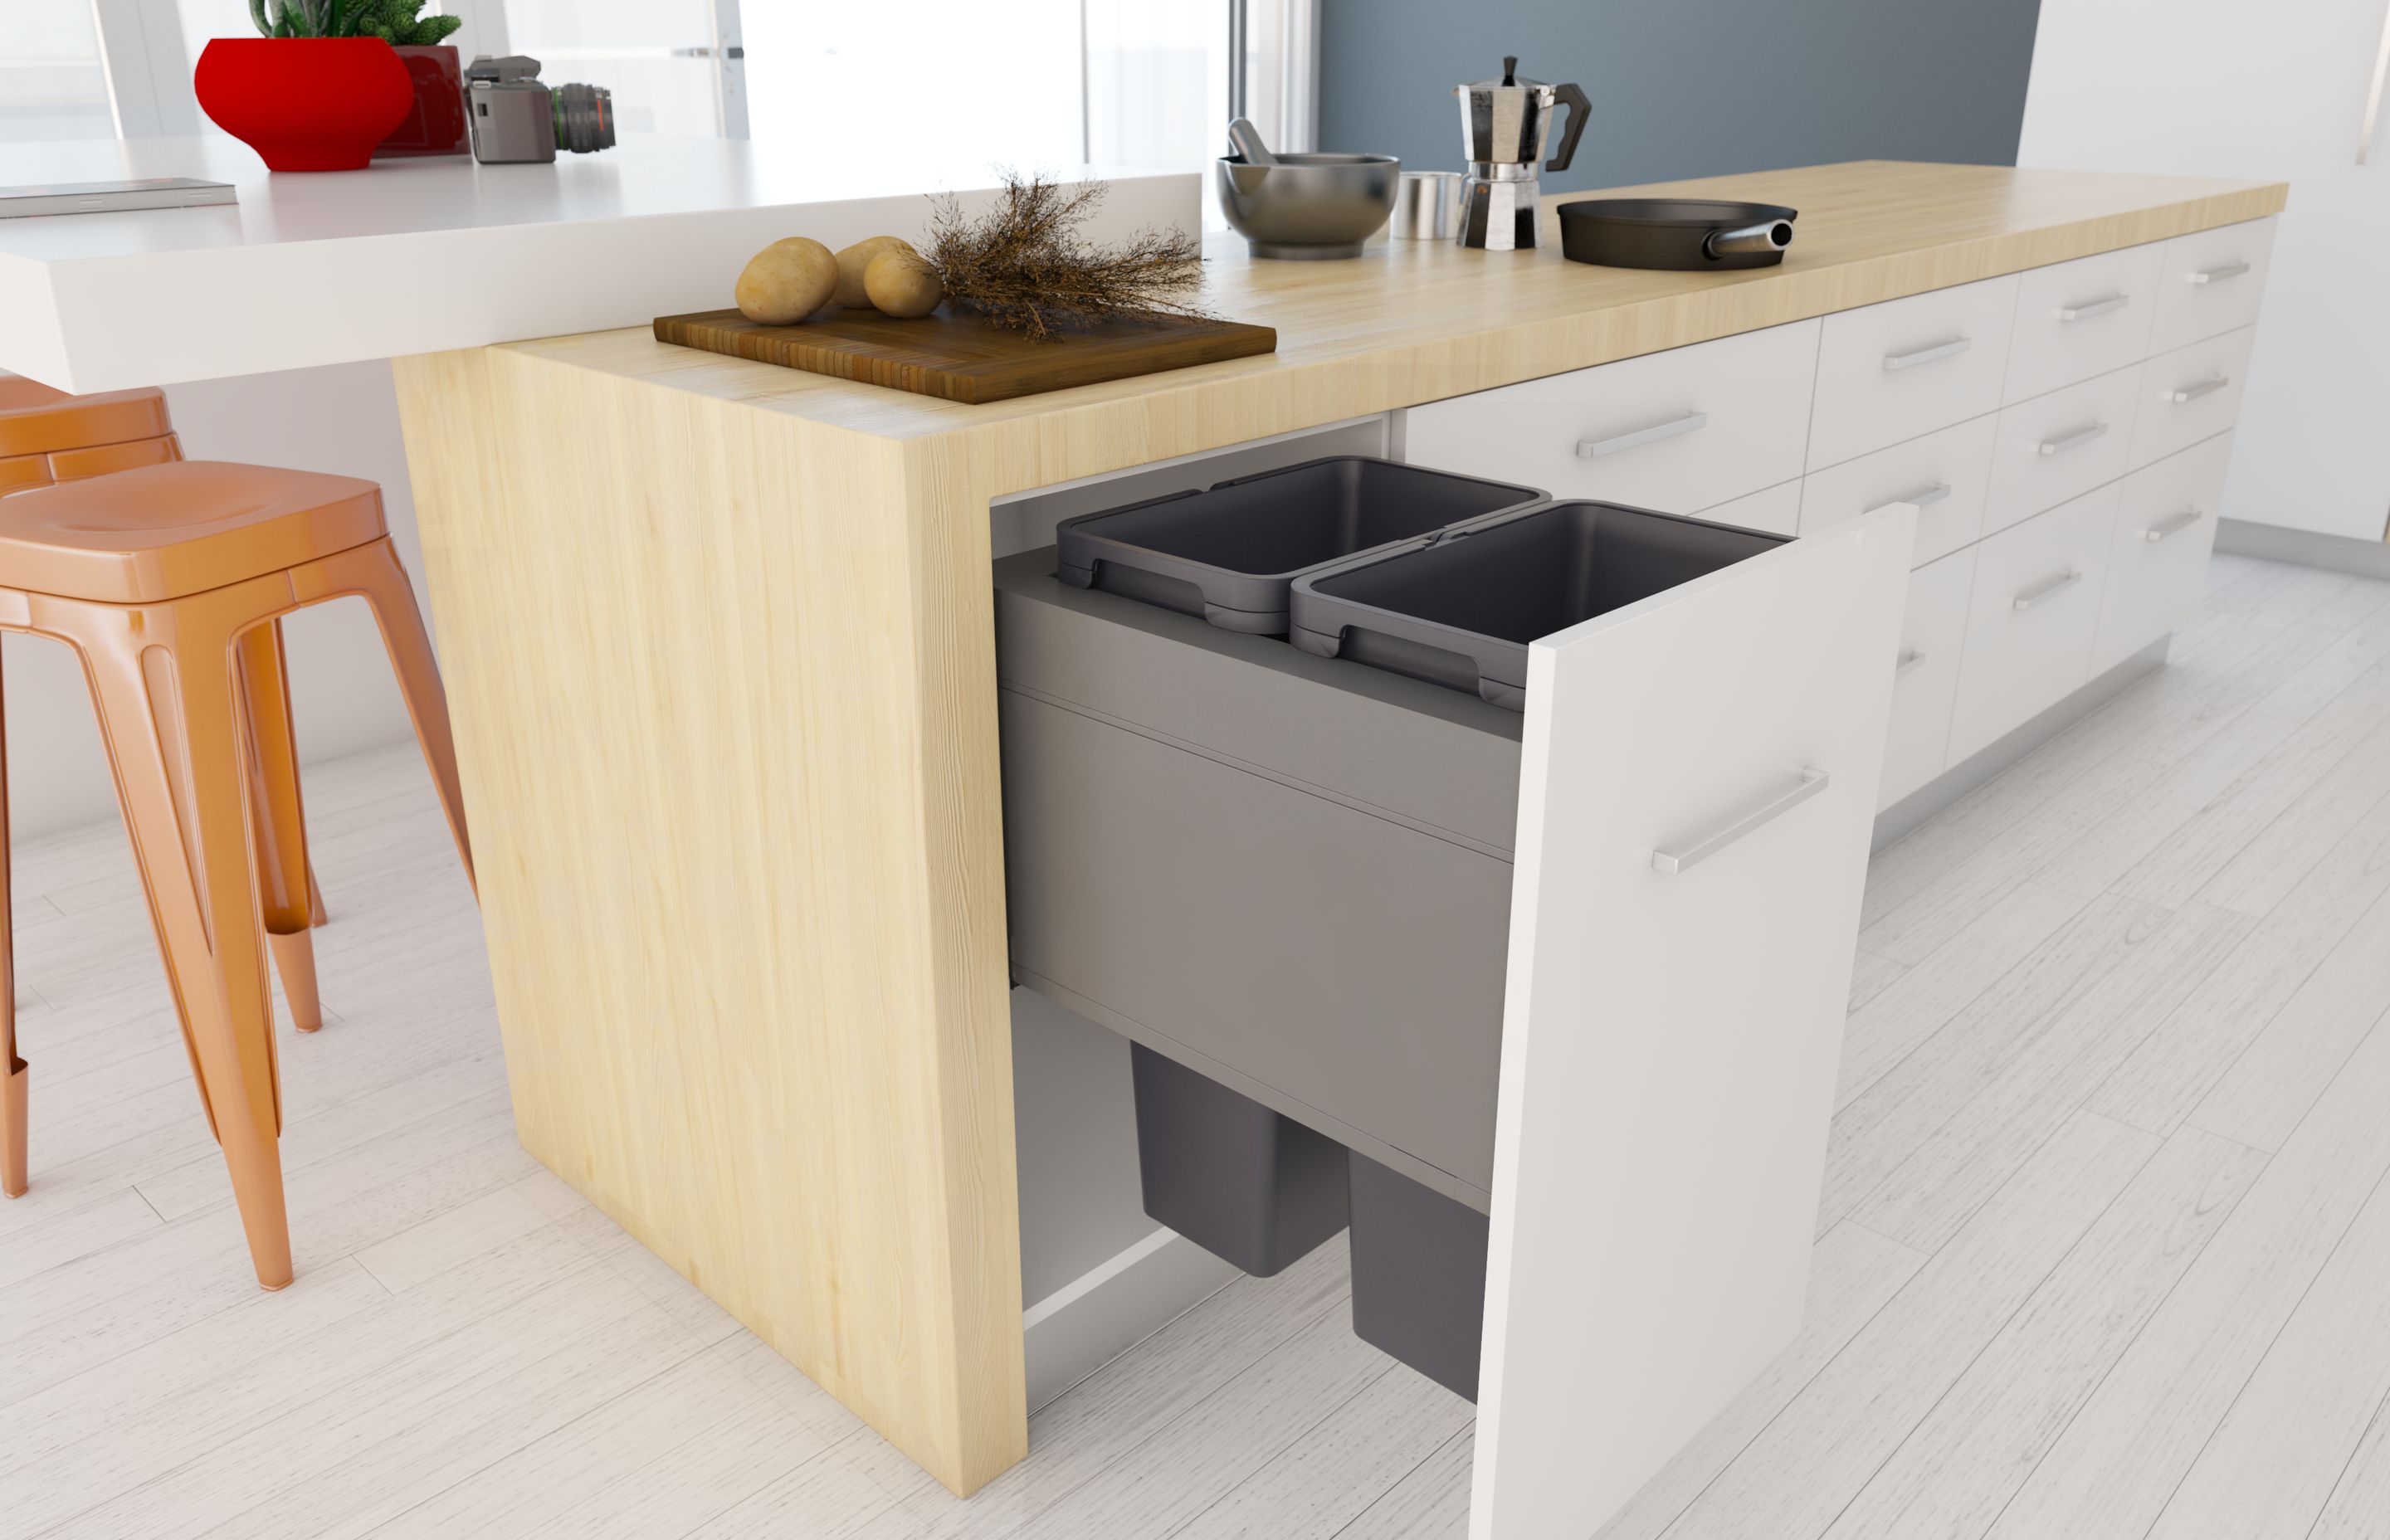 Four innovative pull-out kitchen bin and laundry systems